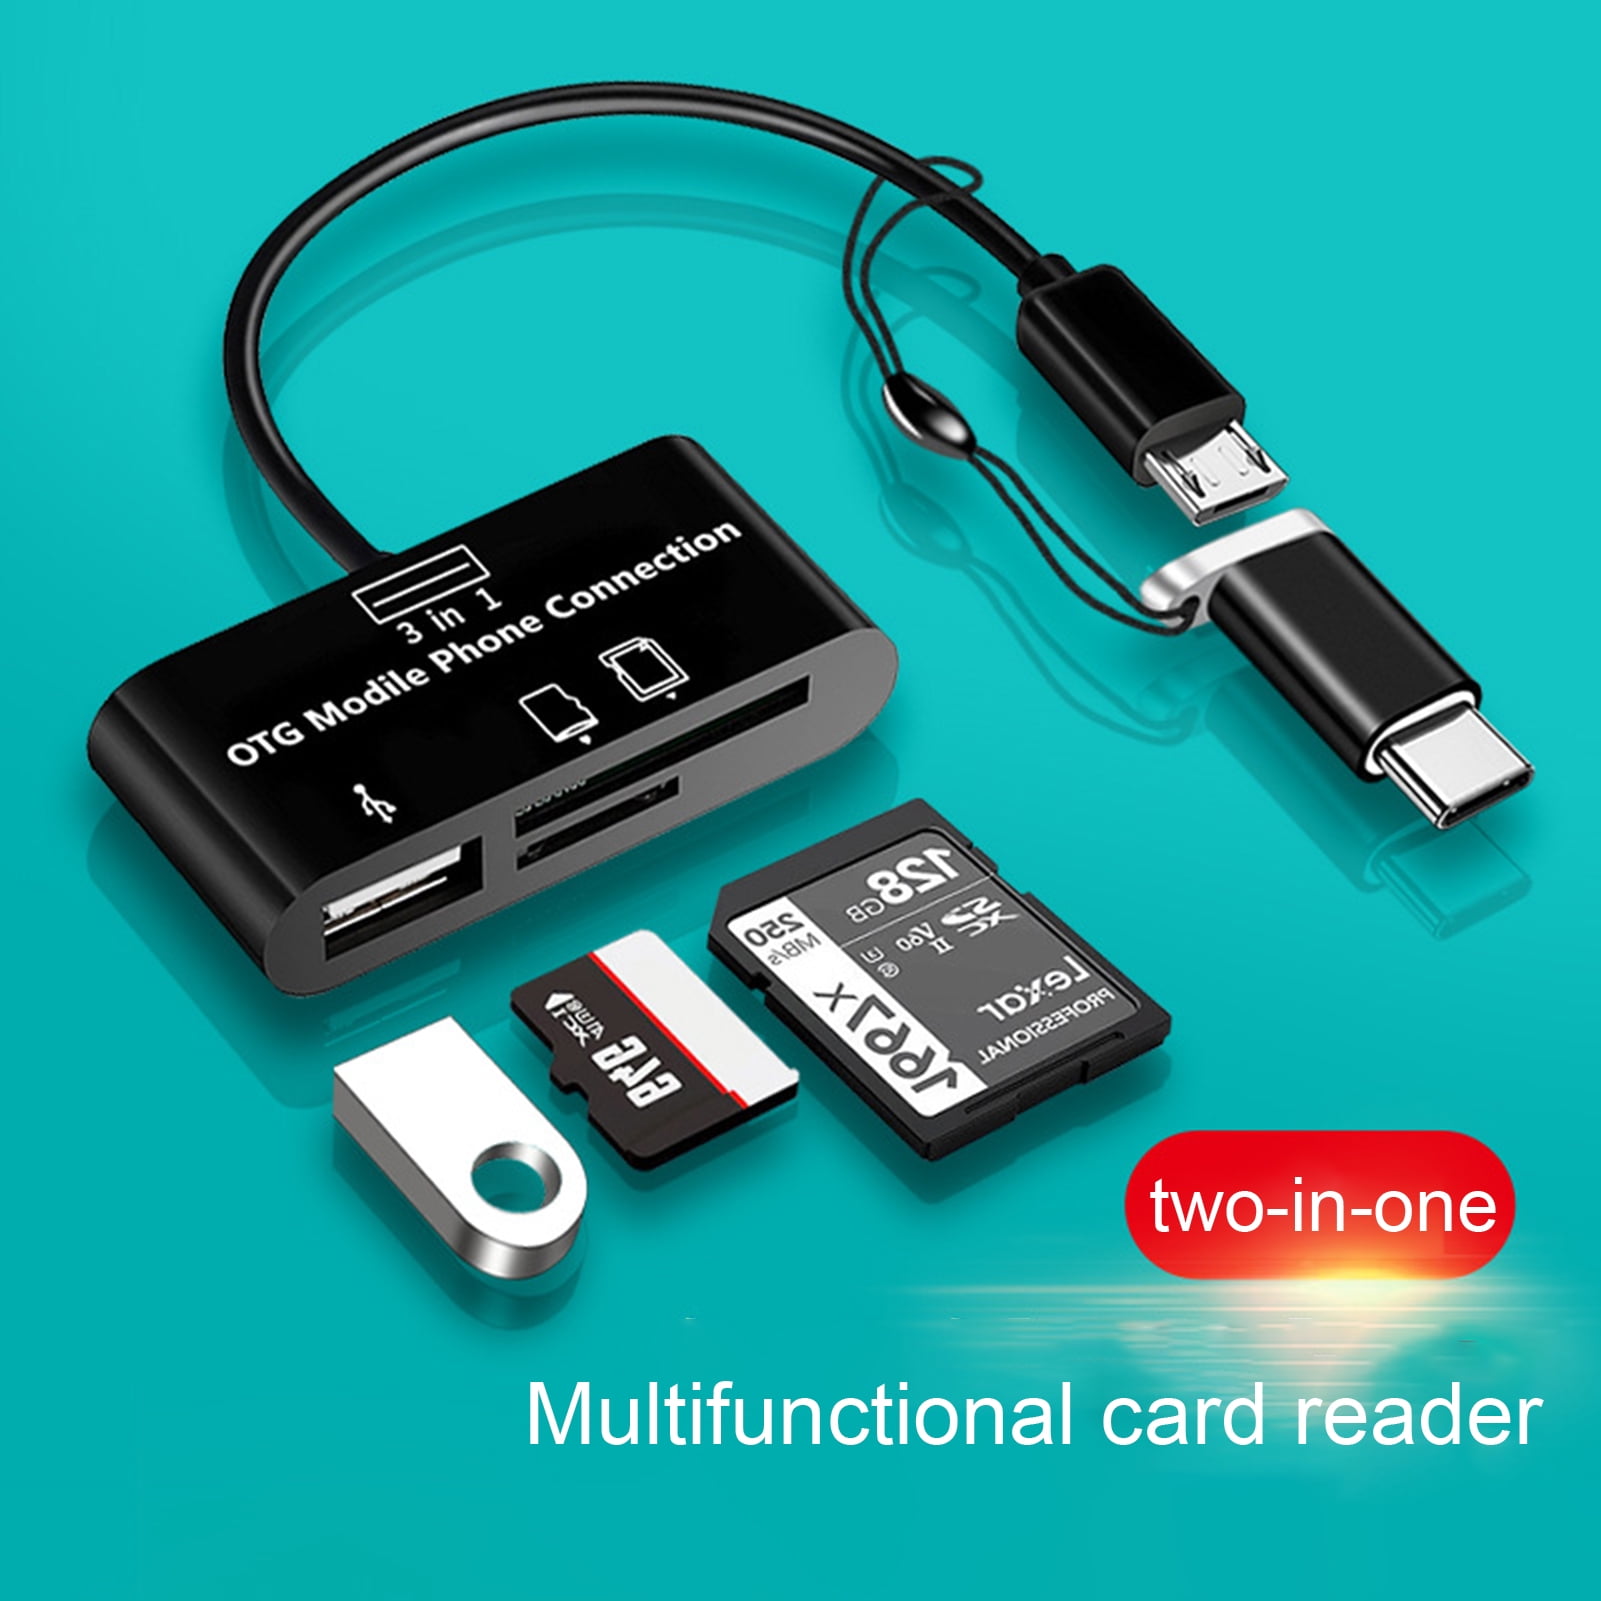 C356 Type-C MicroSD Card Reader with USB 3.0 Super Speed Technology,  Supports MicroSDXC, MicroSDHC, and MicroSD for Window, Mac OS X and Andriod